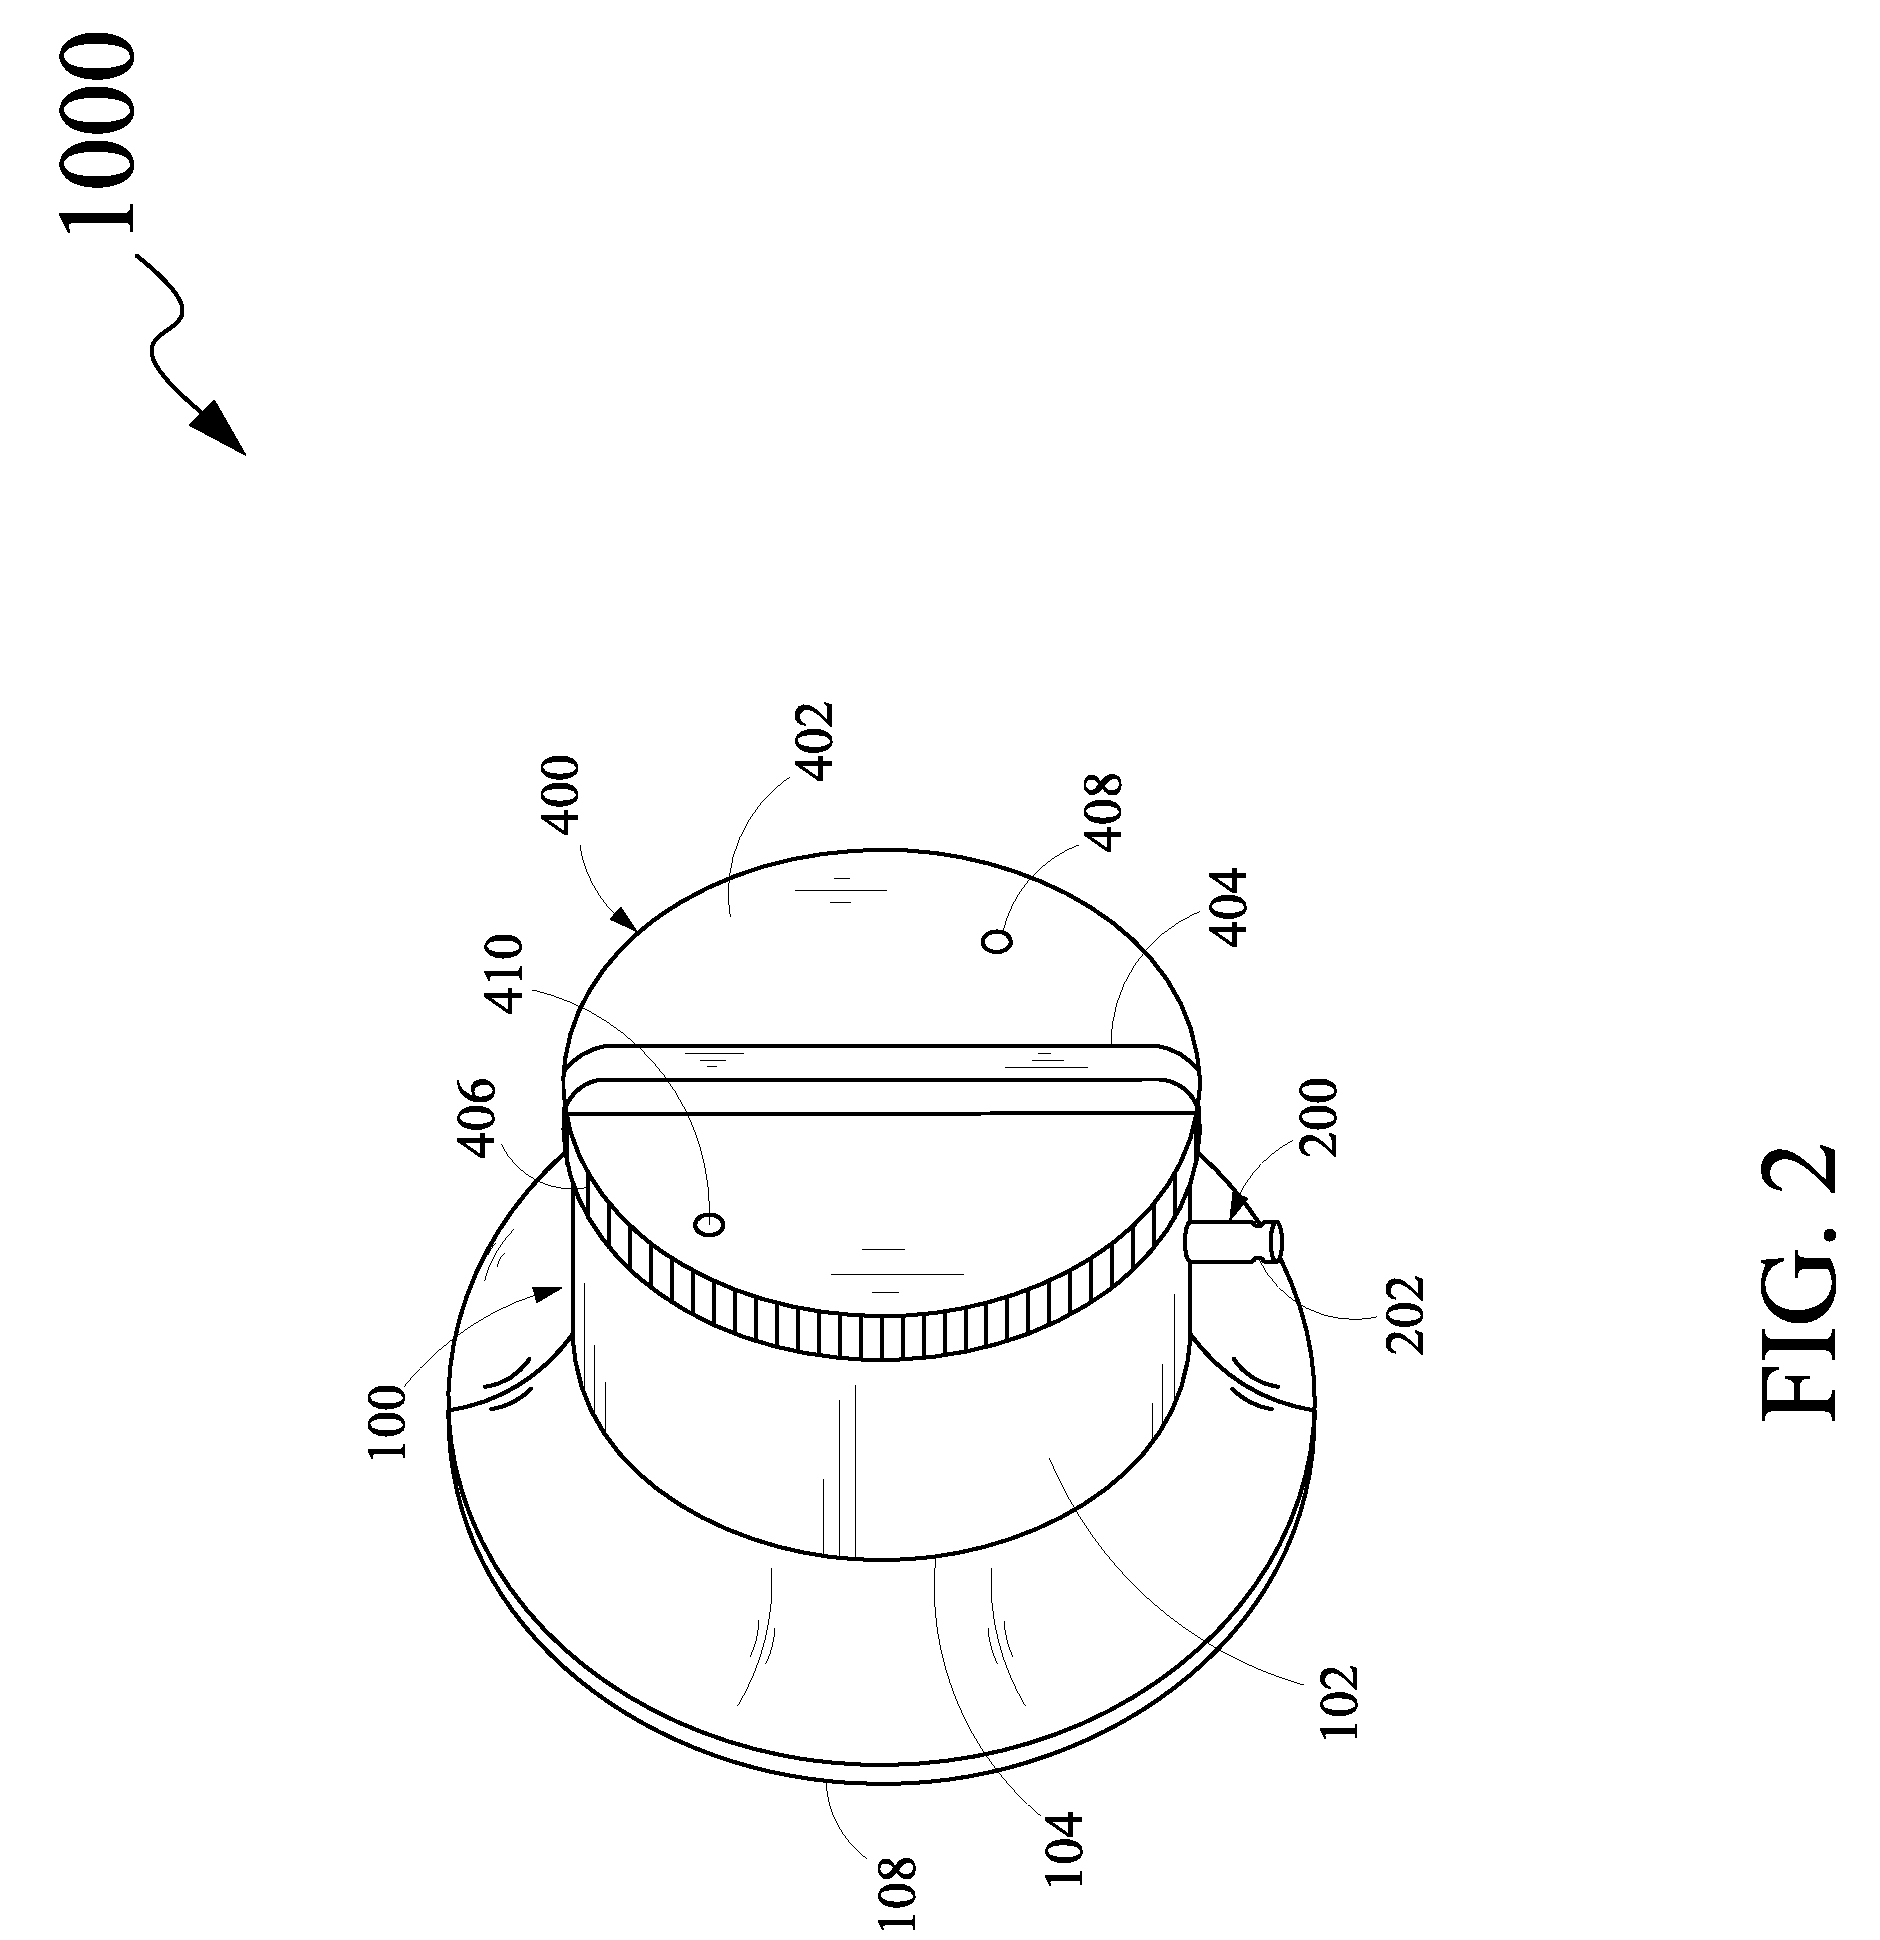 Control device for surgical stoma